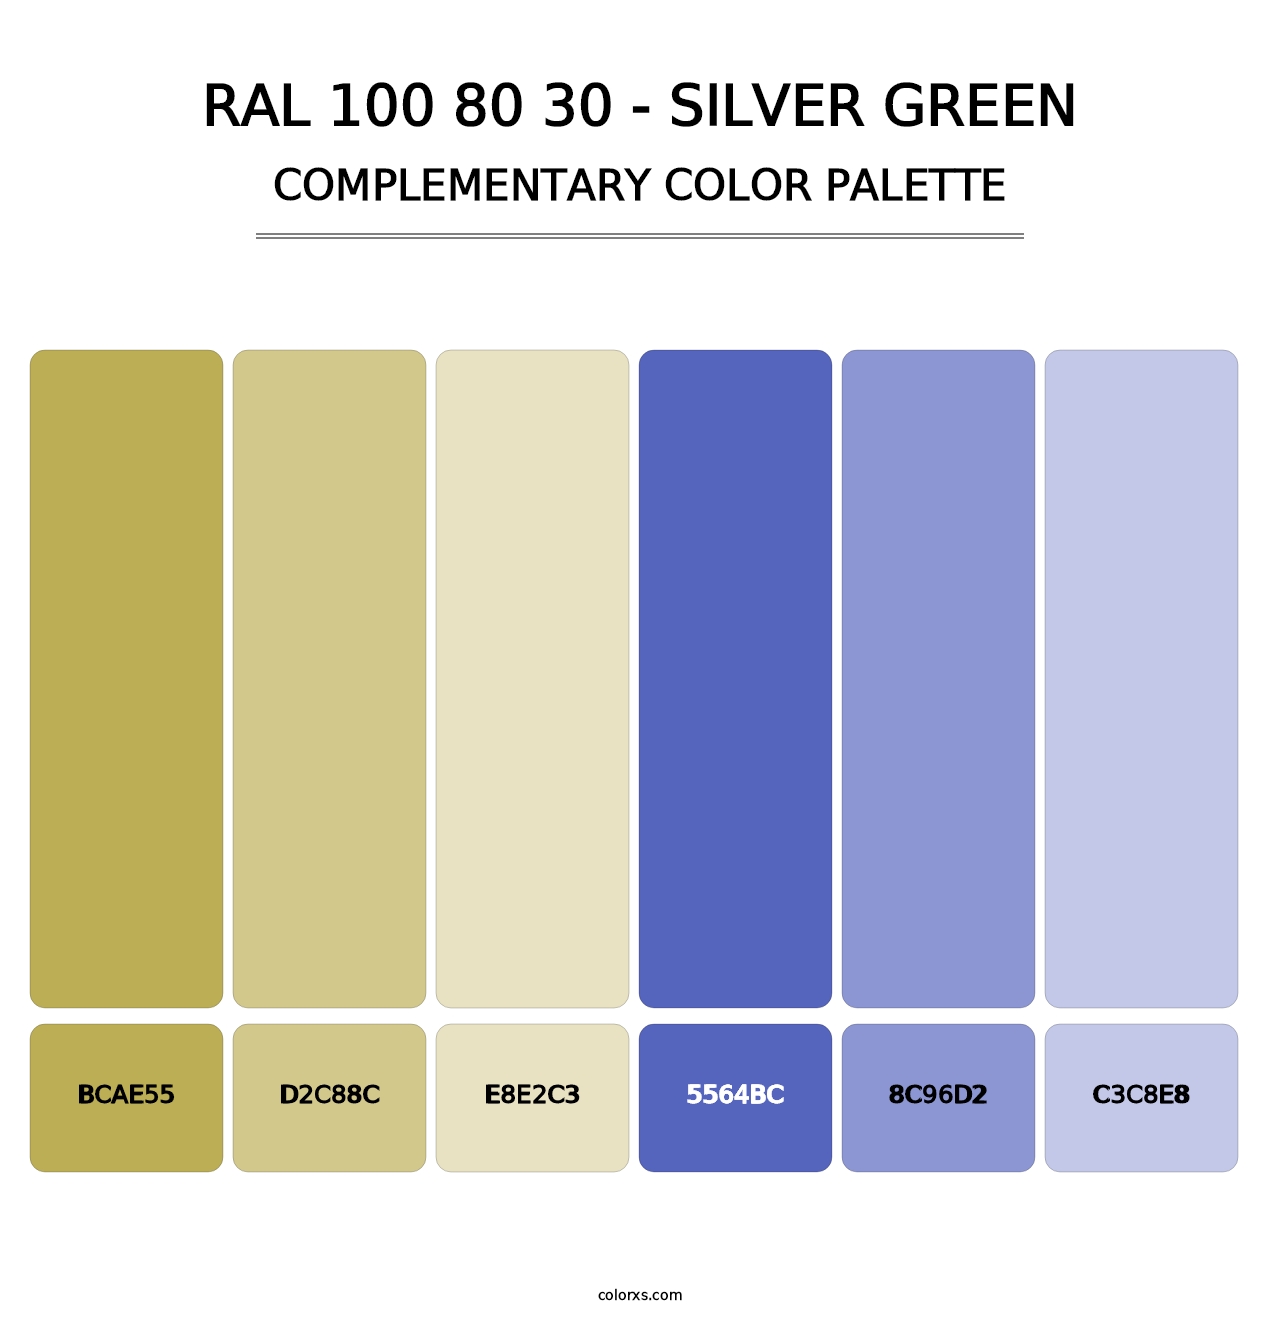 RAL 100 80 30 - Silver Green - Complementary Color Palette